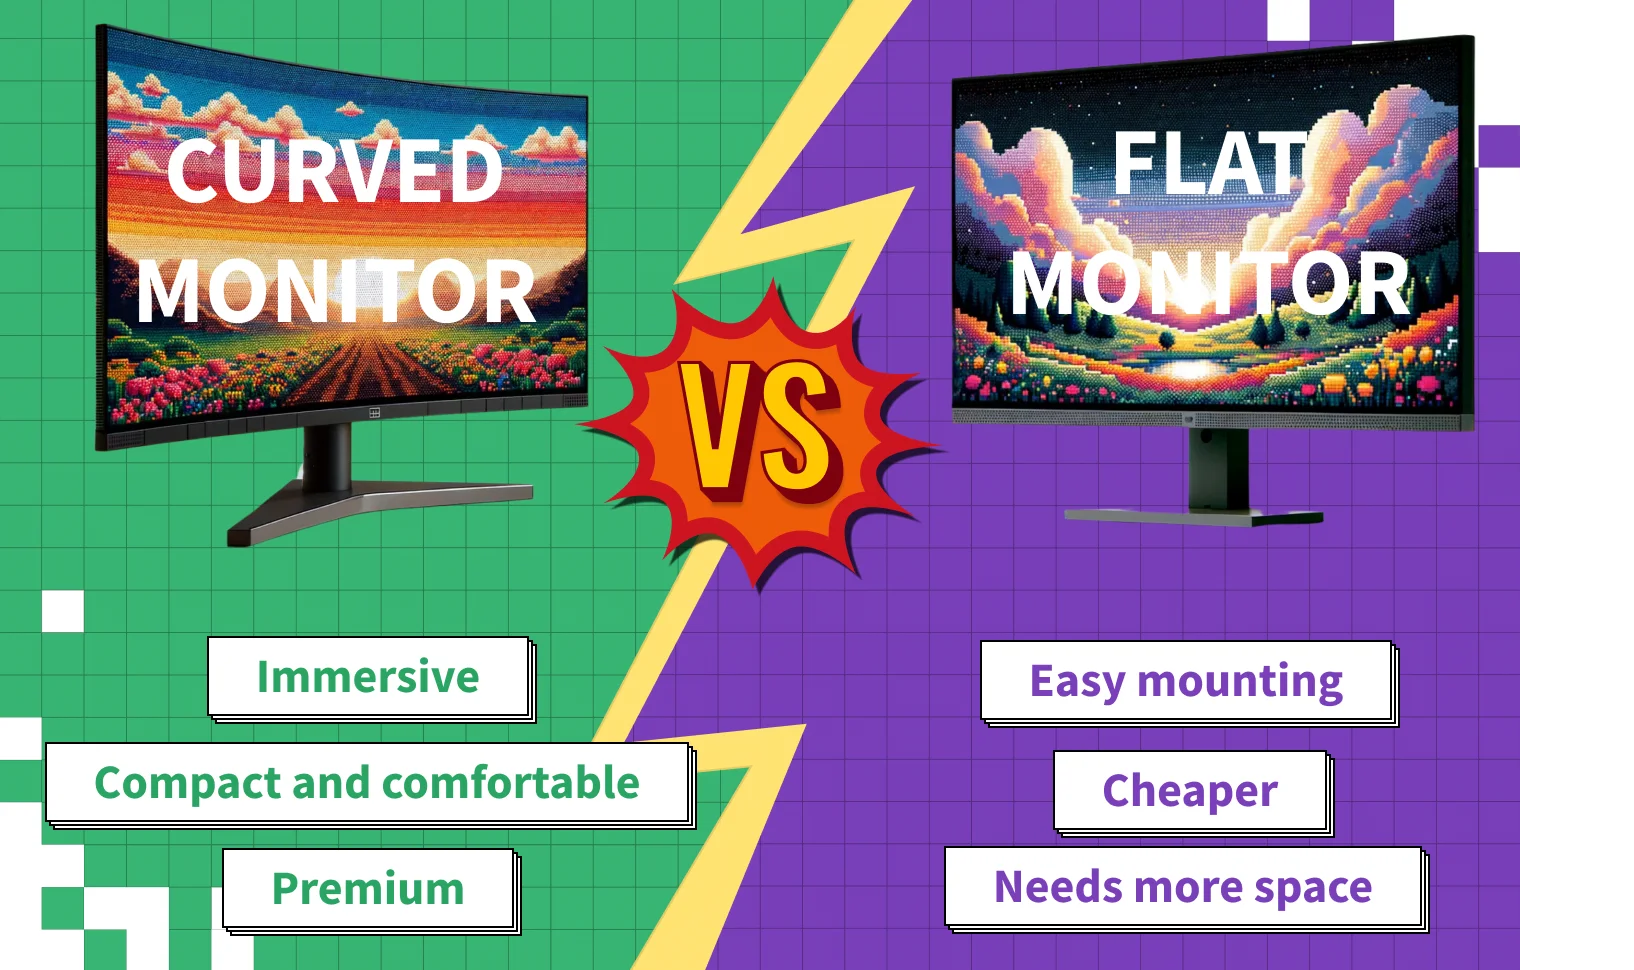 Curved Monitor vs Flat